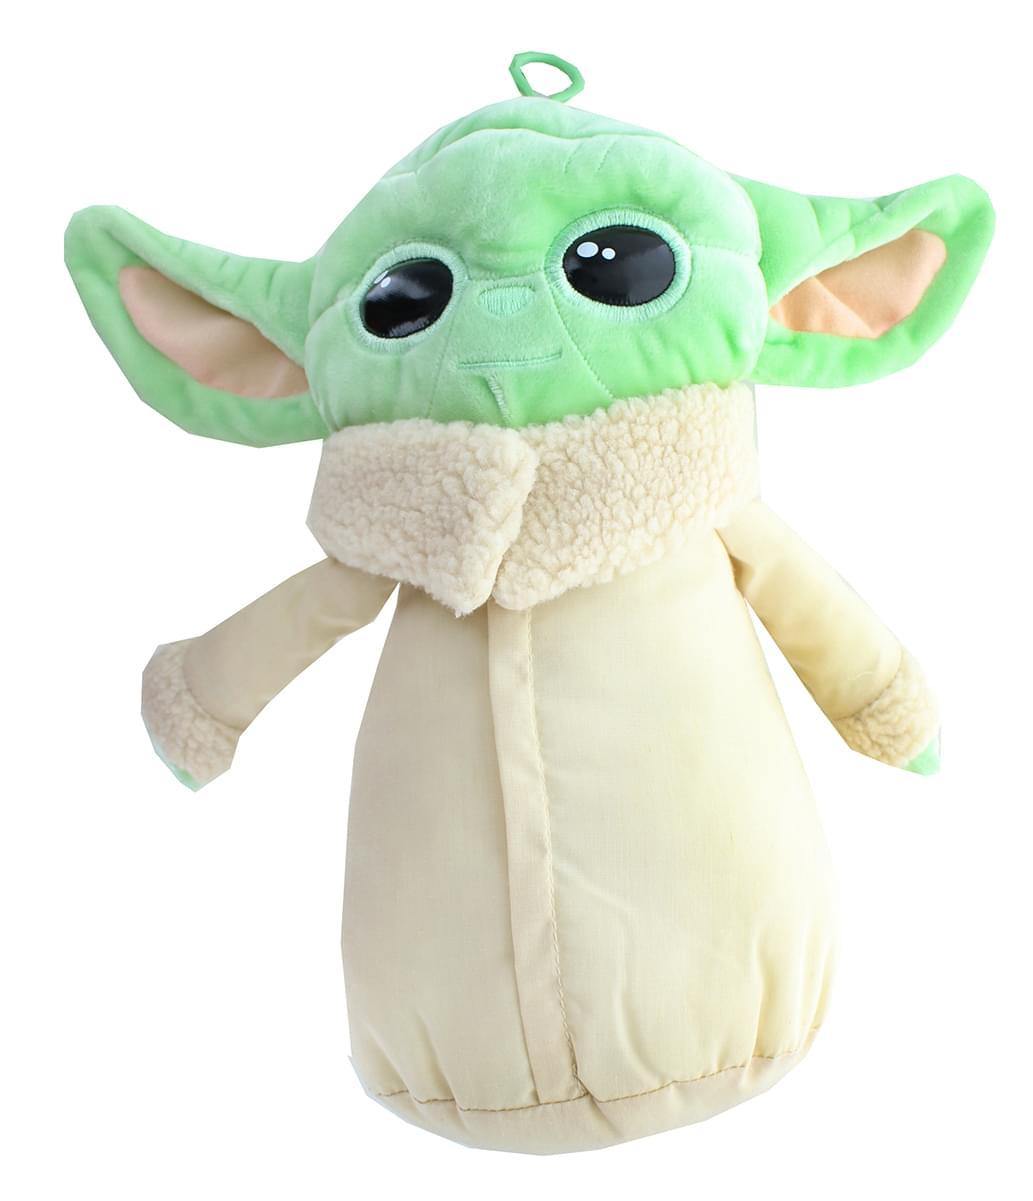 The Child 12-Inch Plush Toy with Pocket Zipper